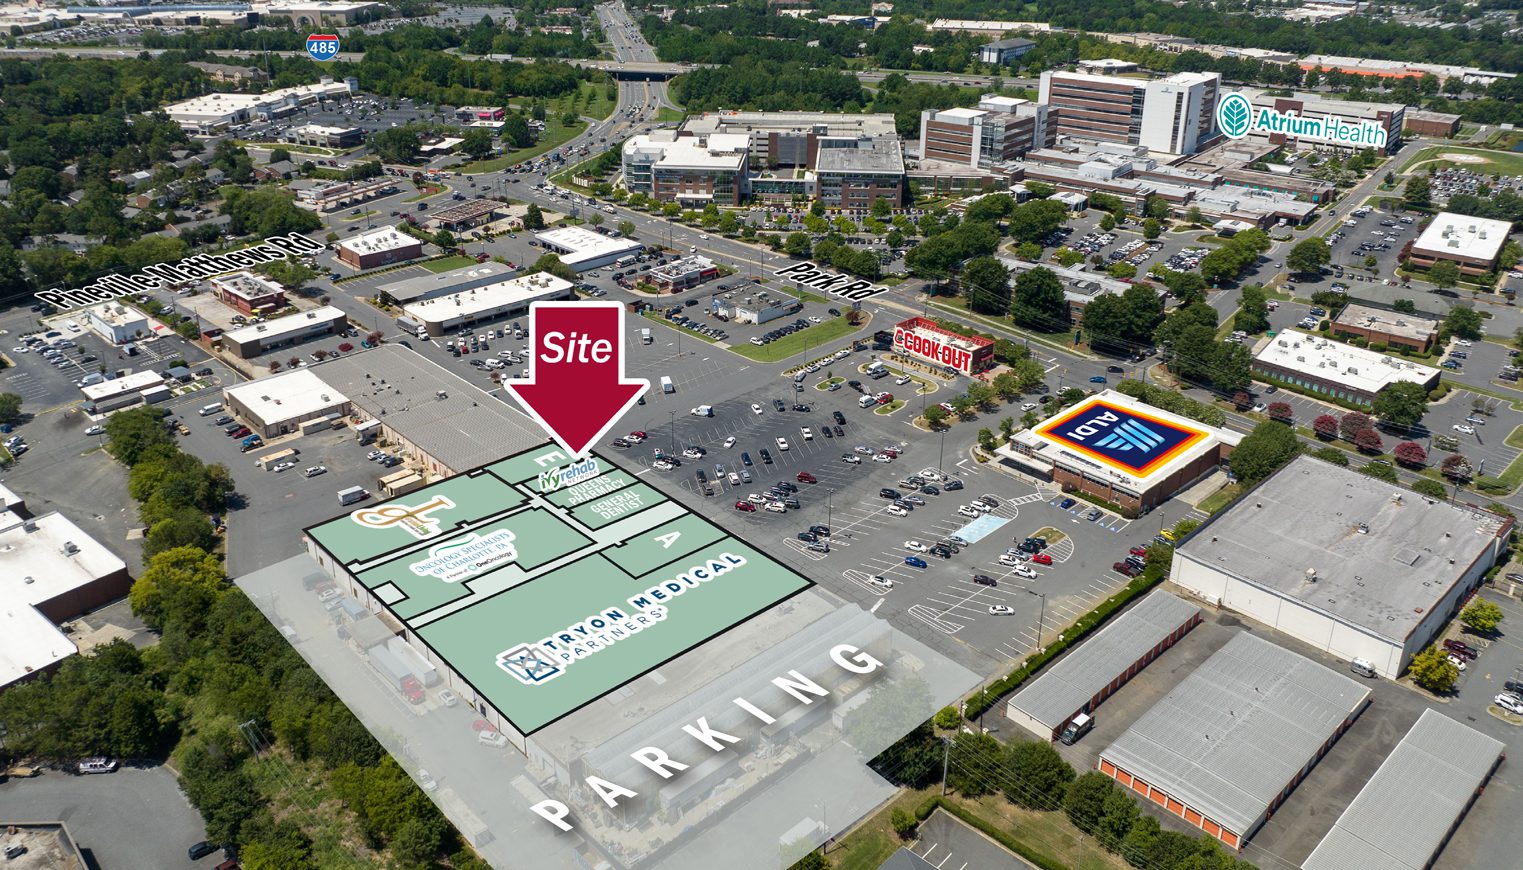 Aerial of commercial center with overlay listing tenants